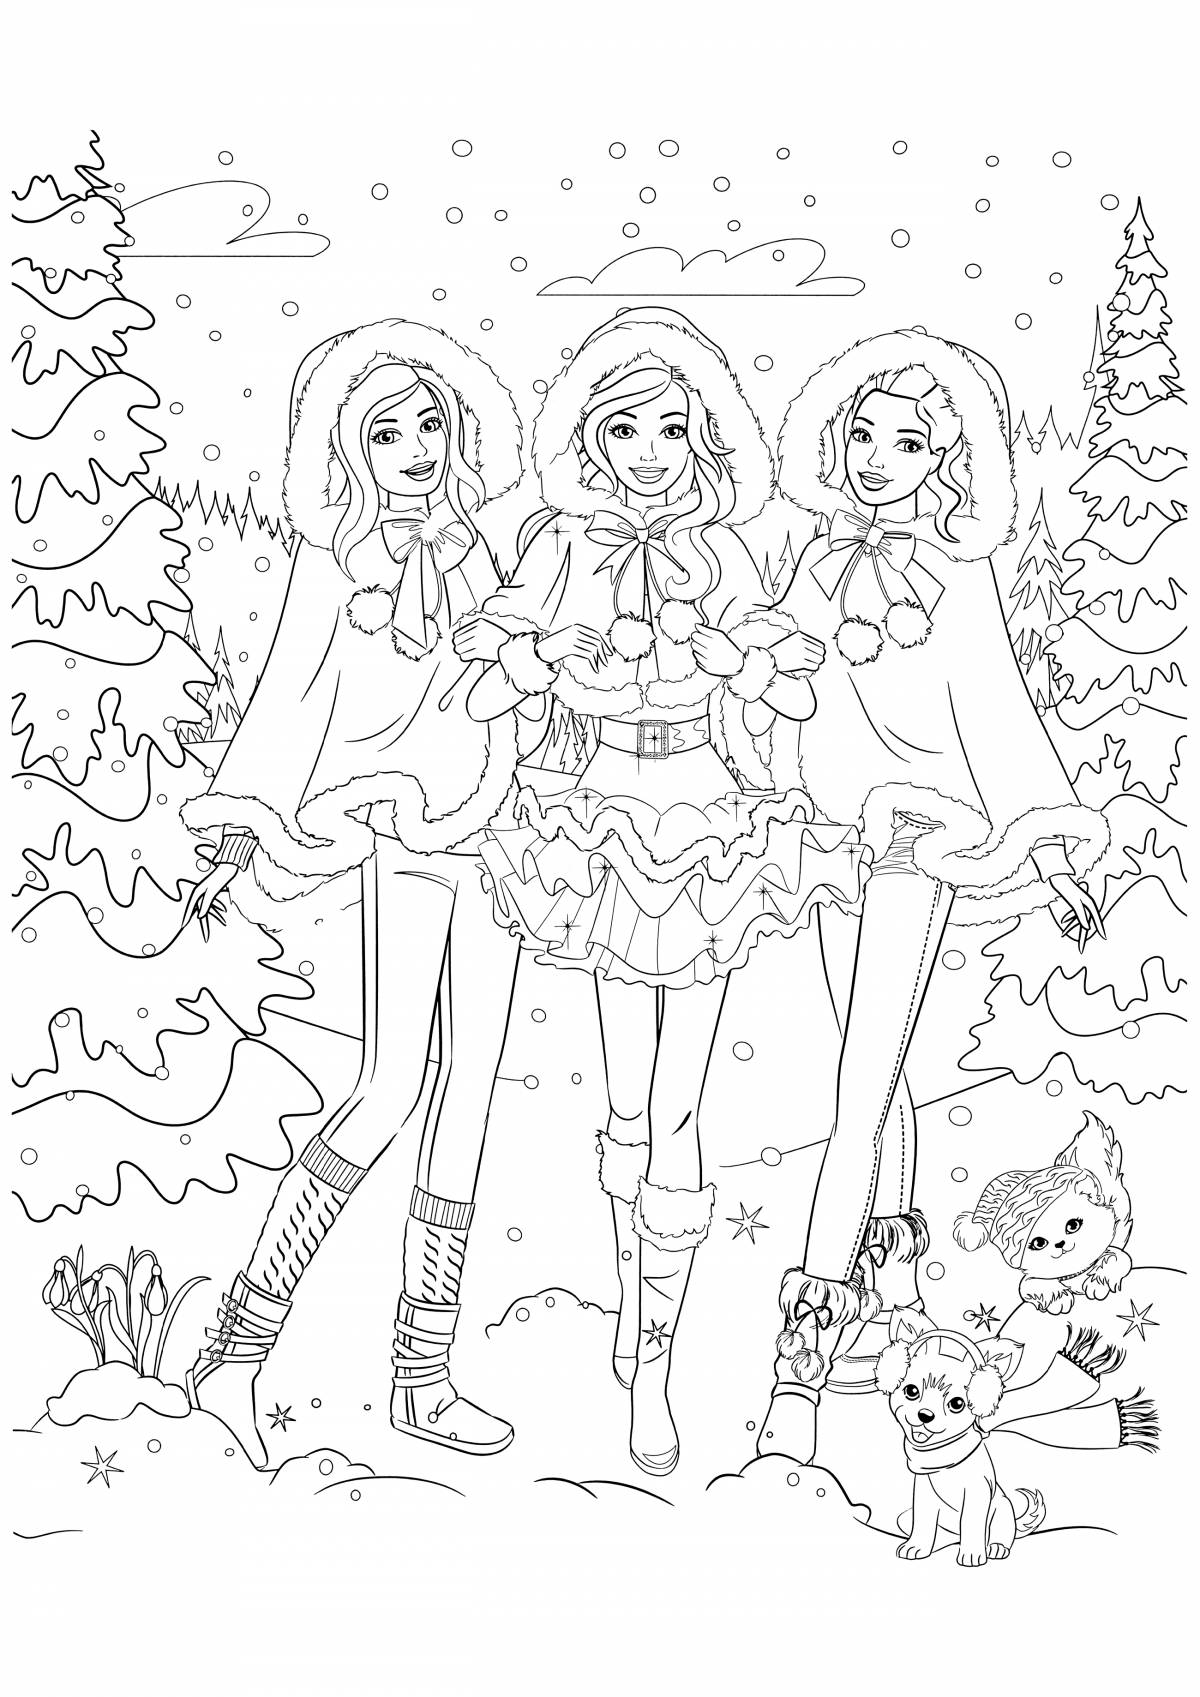 Christmas inspirational coloring book for 10 year old girls